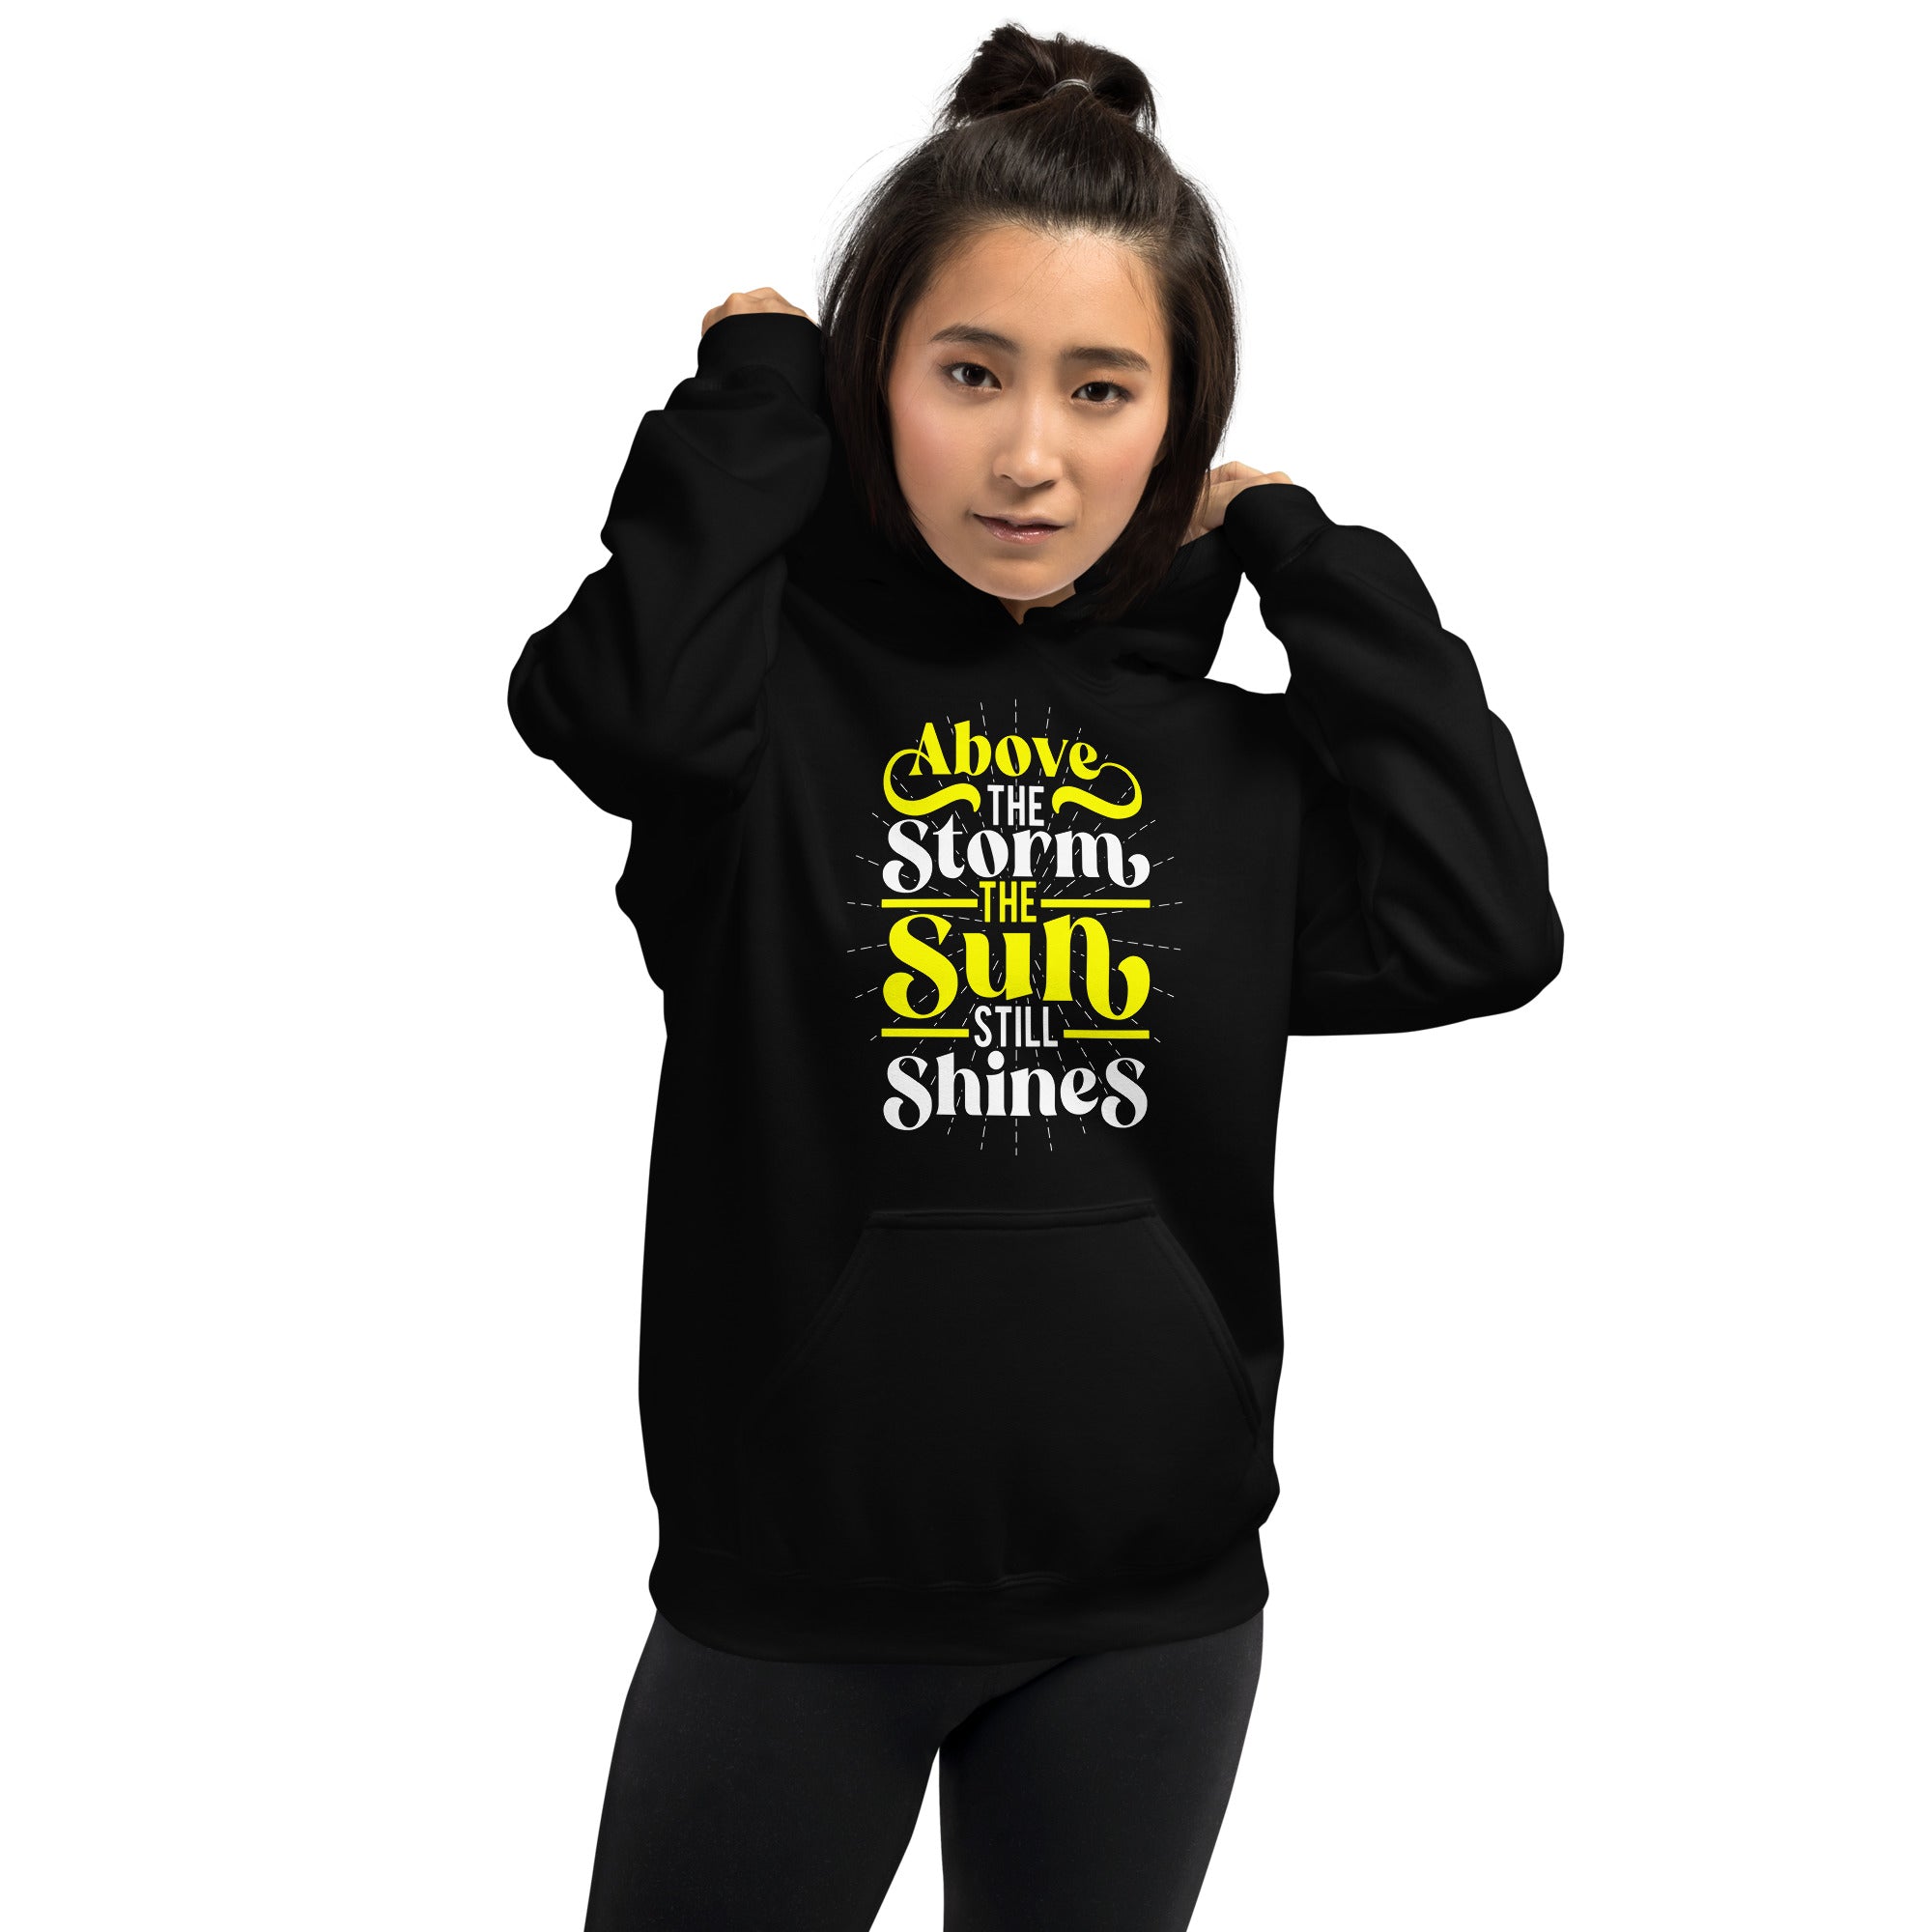 Above The Storm, The Sun Still Shines - Unisex Hoodie